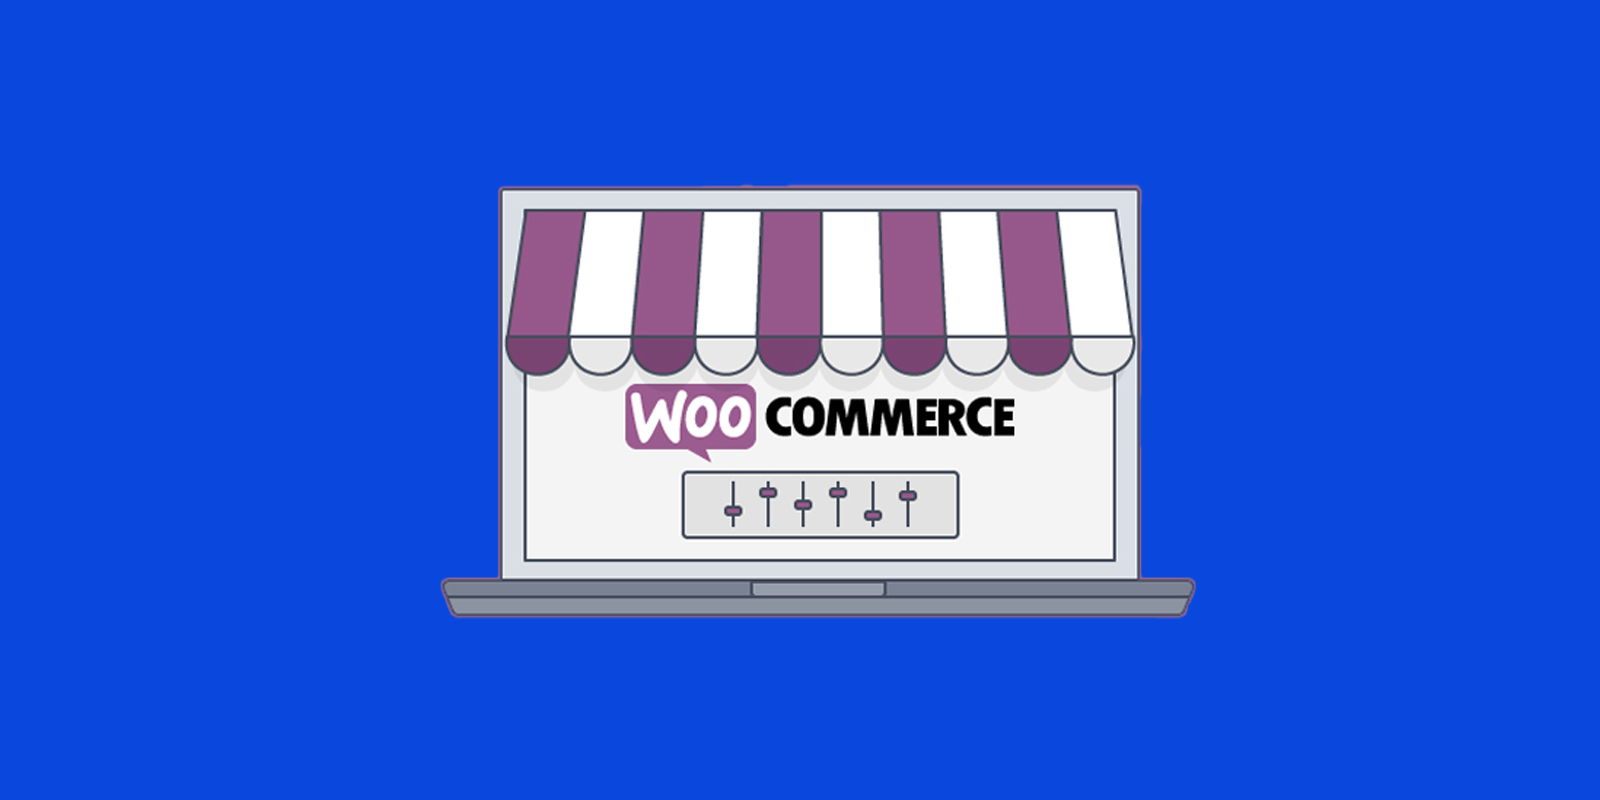 How to change Built with Storefront & WooCommerce at storefront footer?